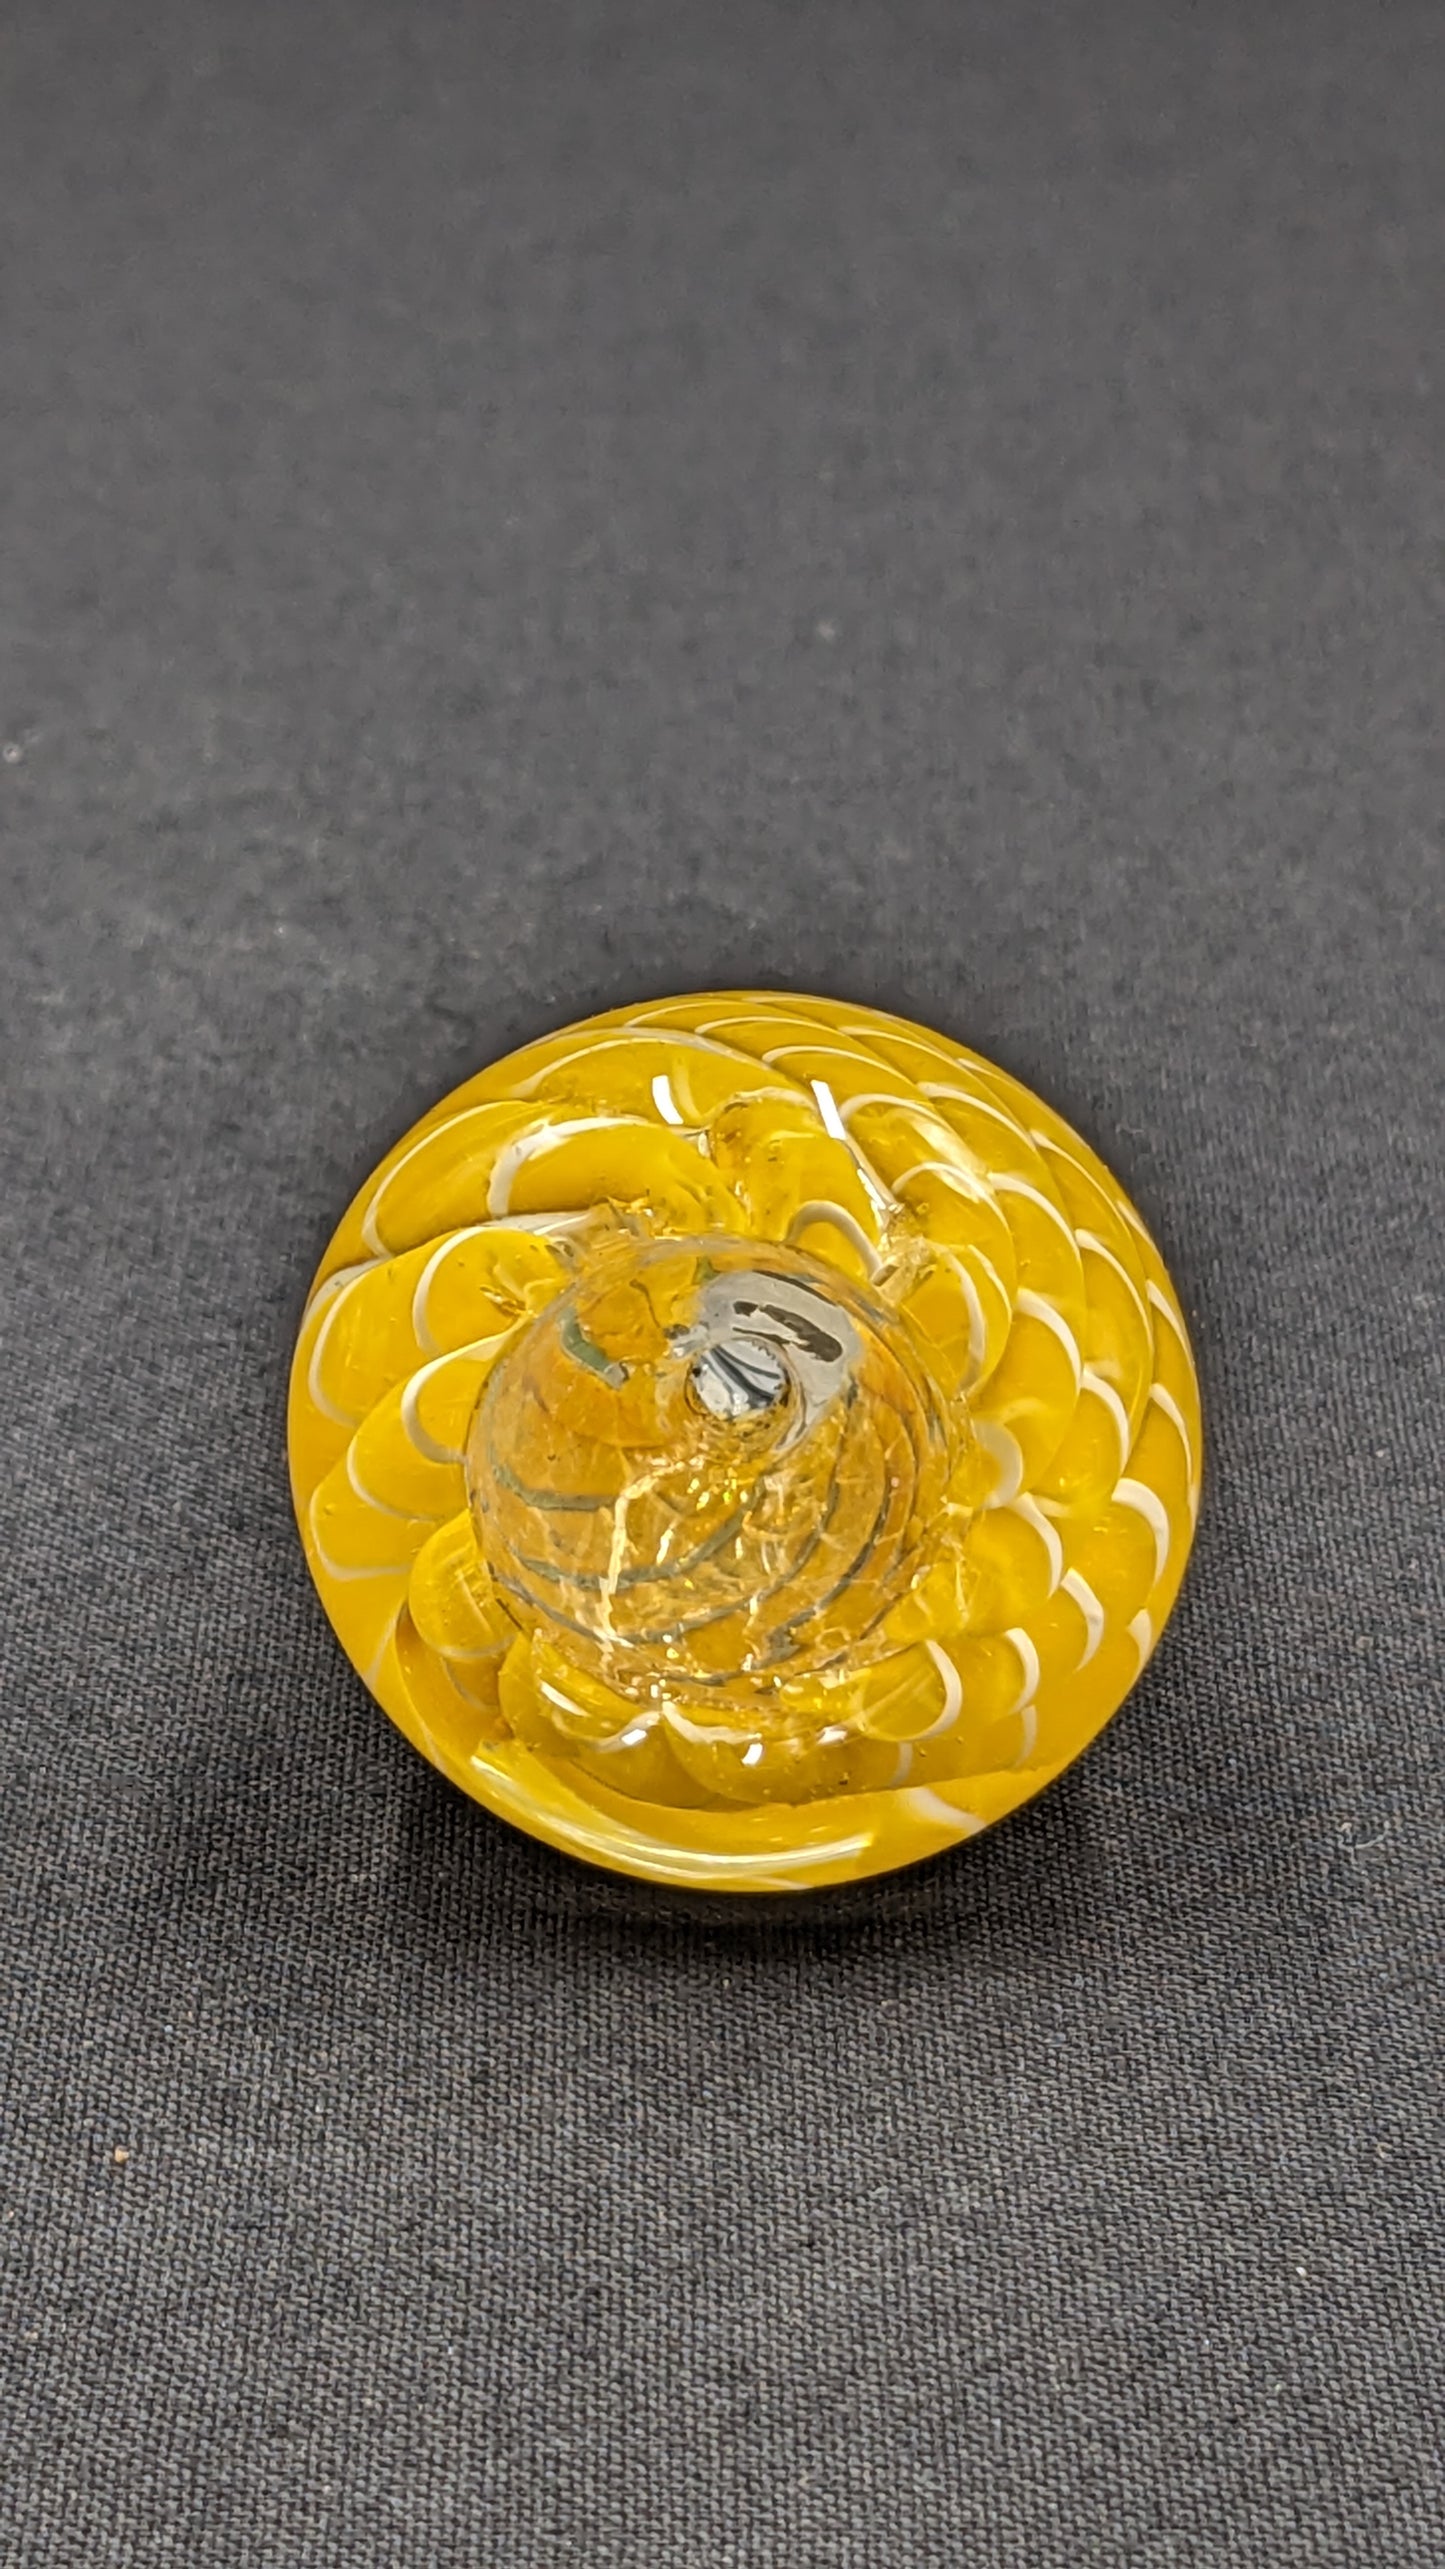 14mm Male Slide Bowl Glass for Water Pipes - BW03 Yellow